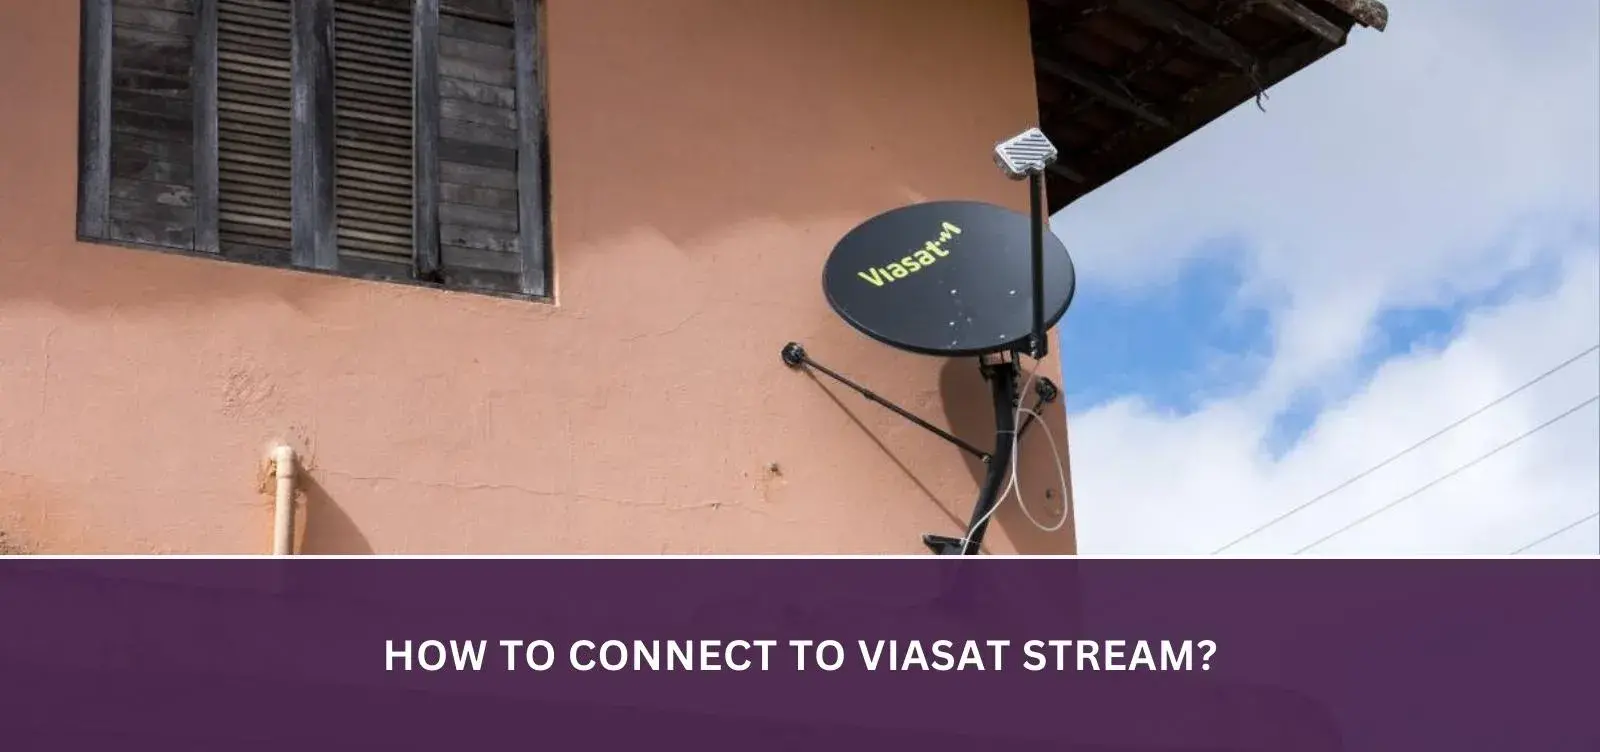 How to connect to Viasat Stream?